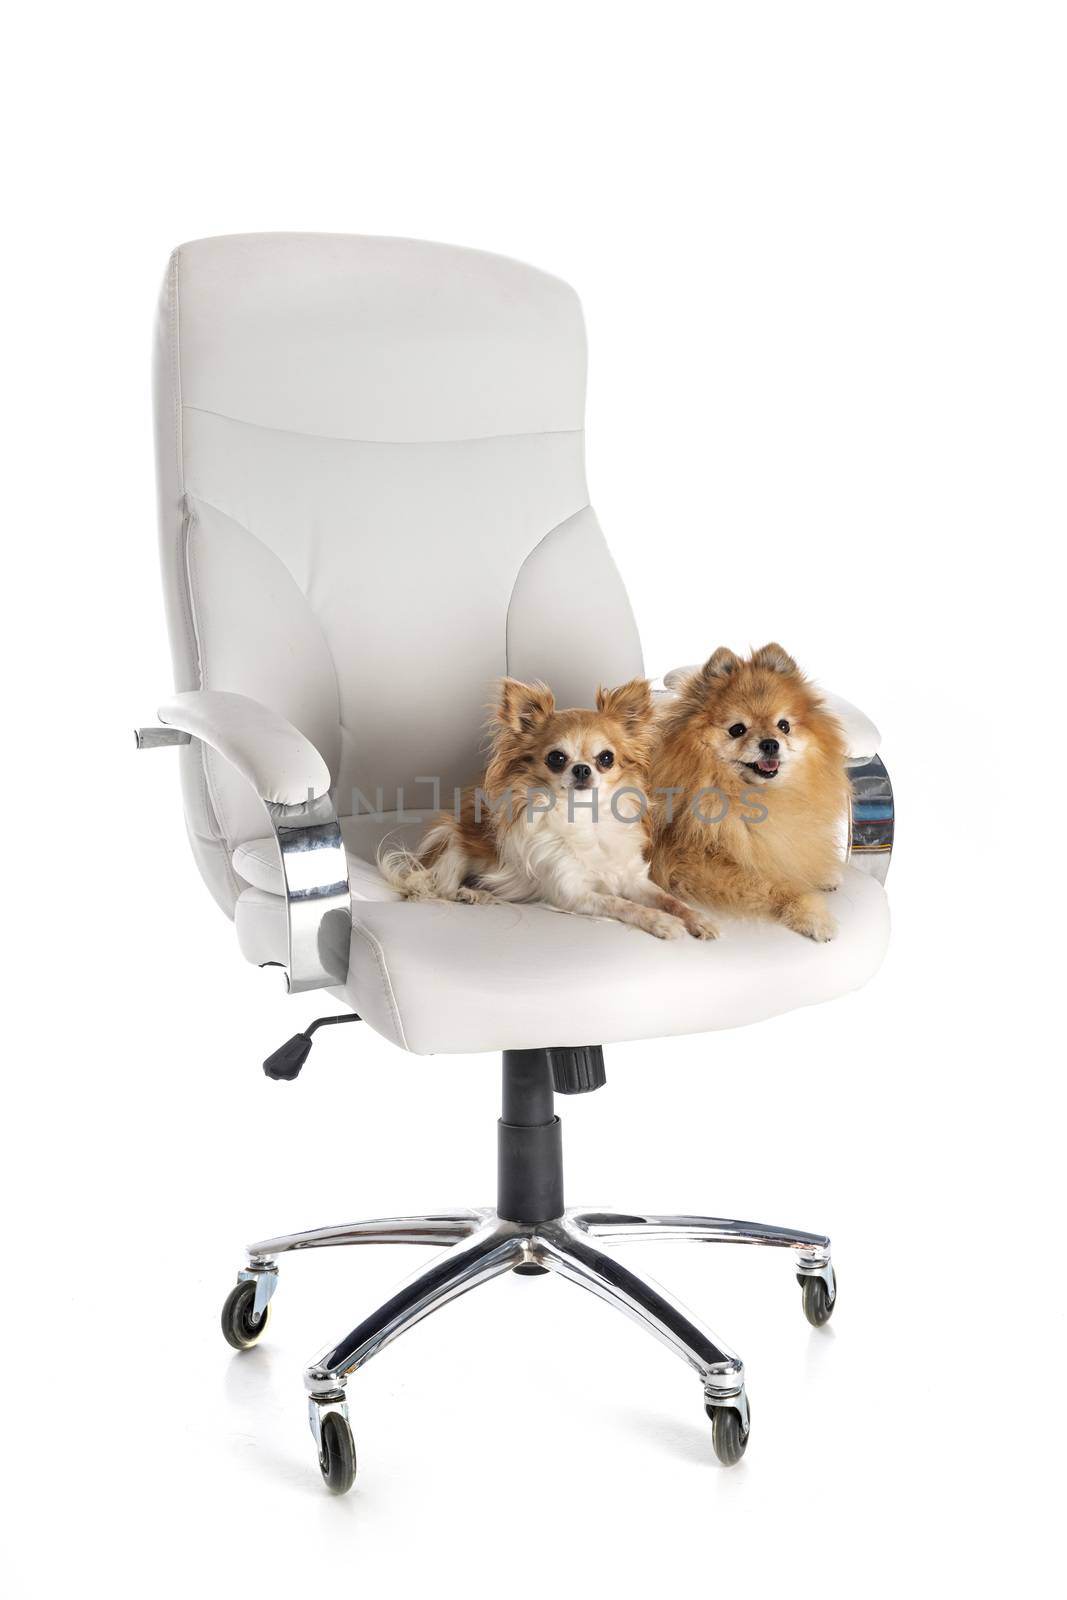 little dogs on chair in front of white background